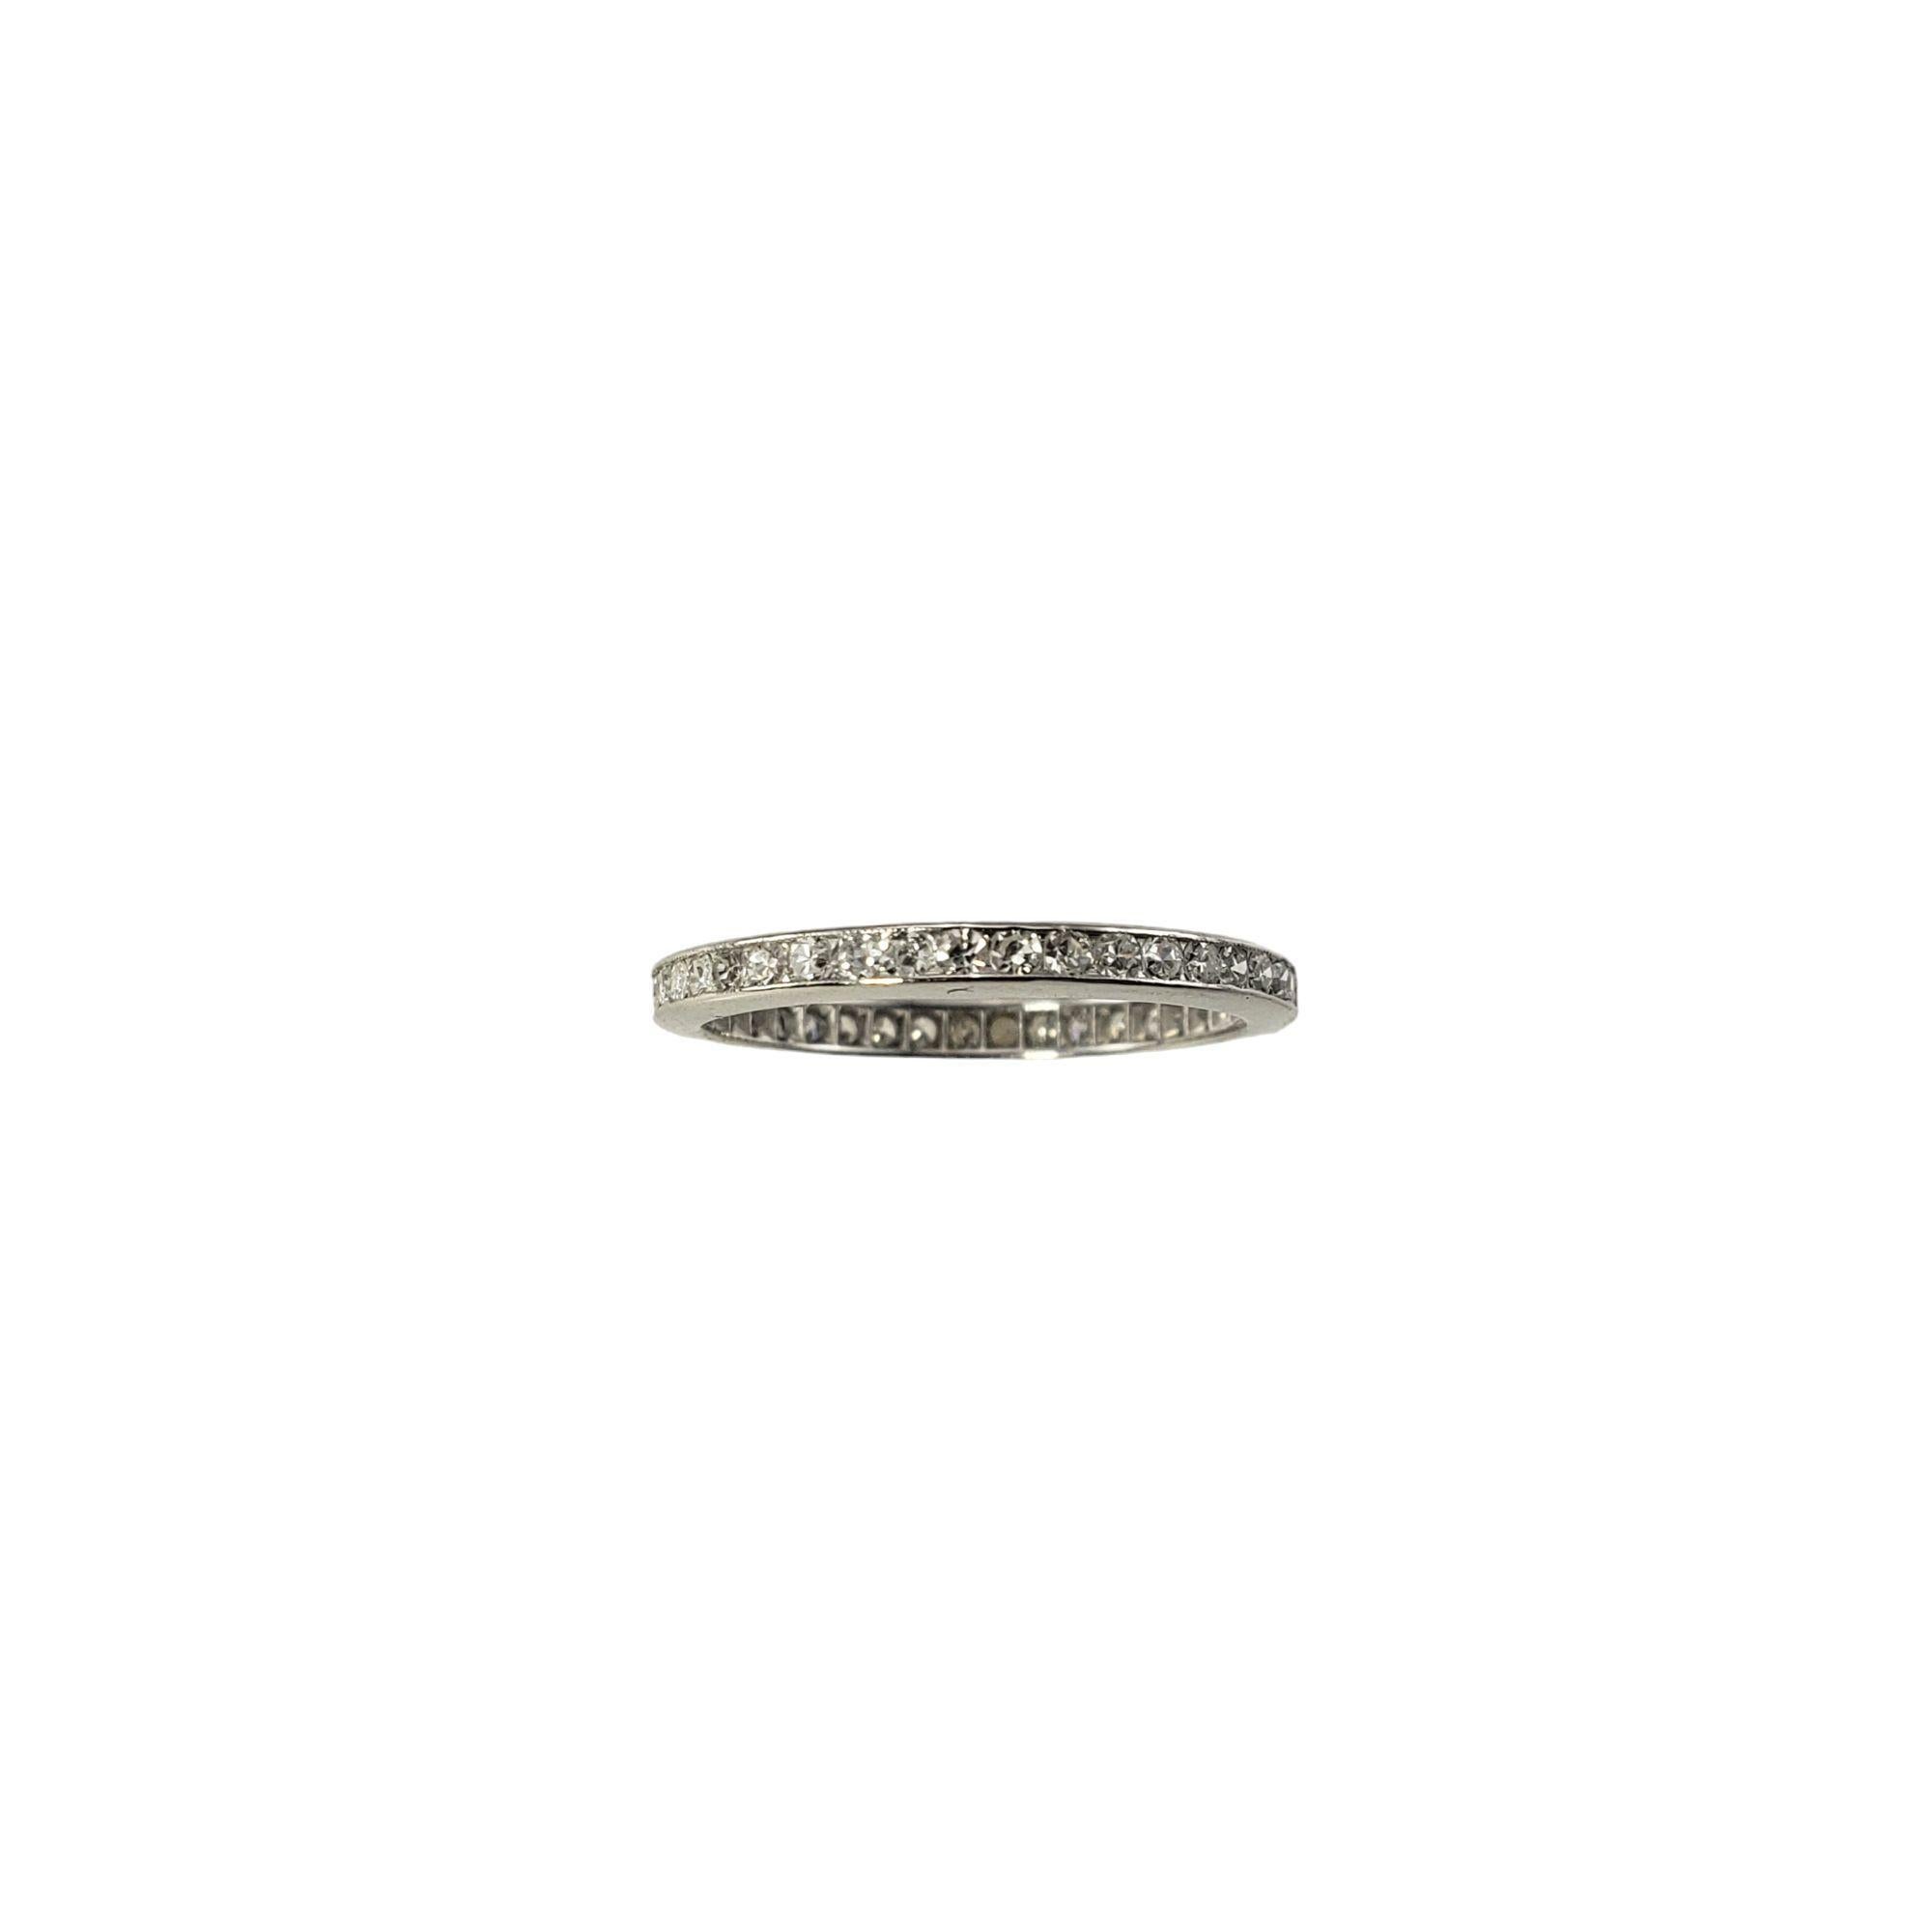 Platinum Diamond Eternity Band Ring Size 6.75 JAGi Certified-

This sparkling eternity band features 41 round single cut diamonds set in classic platinum. Width: 2 mm.

Total diamond weight: .50 ct.

Diamond clarity: VS1-VS2

Diamond color: